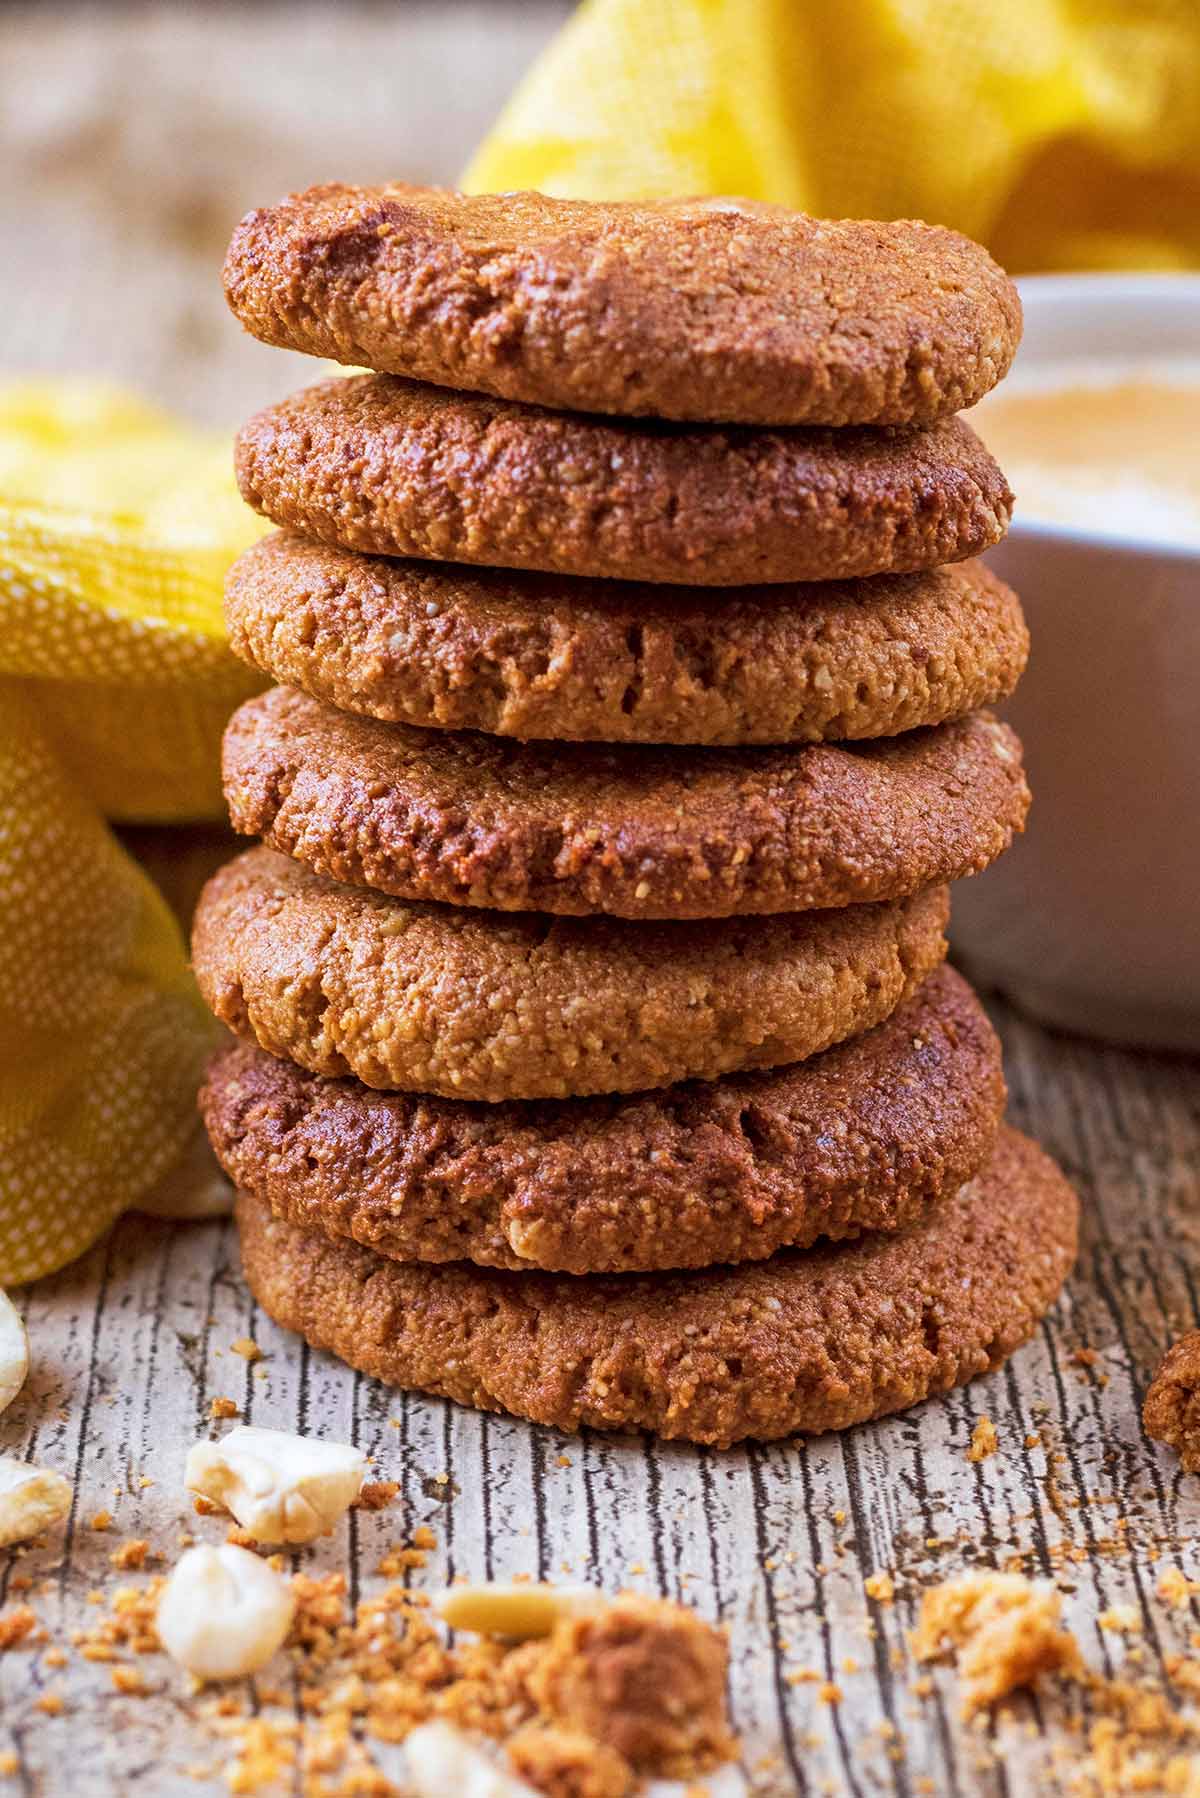 Seven gingernut biscuits stacked in a tower.